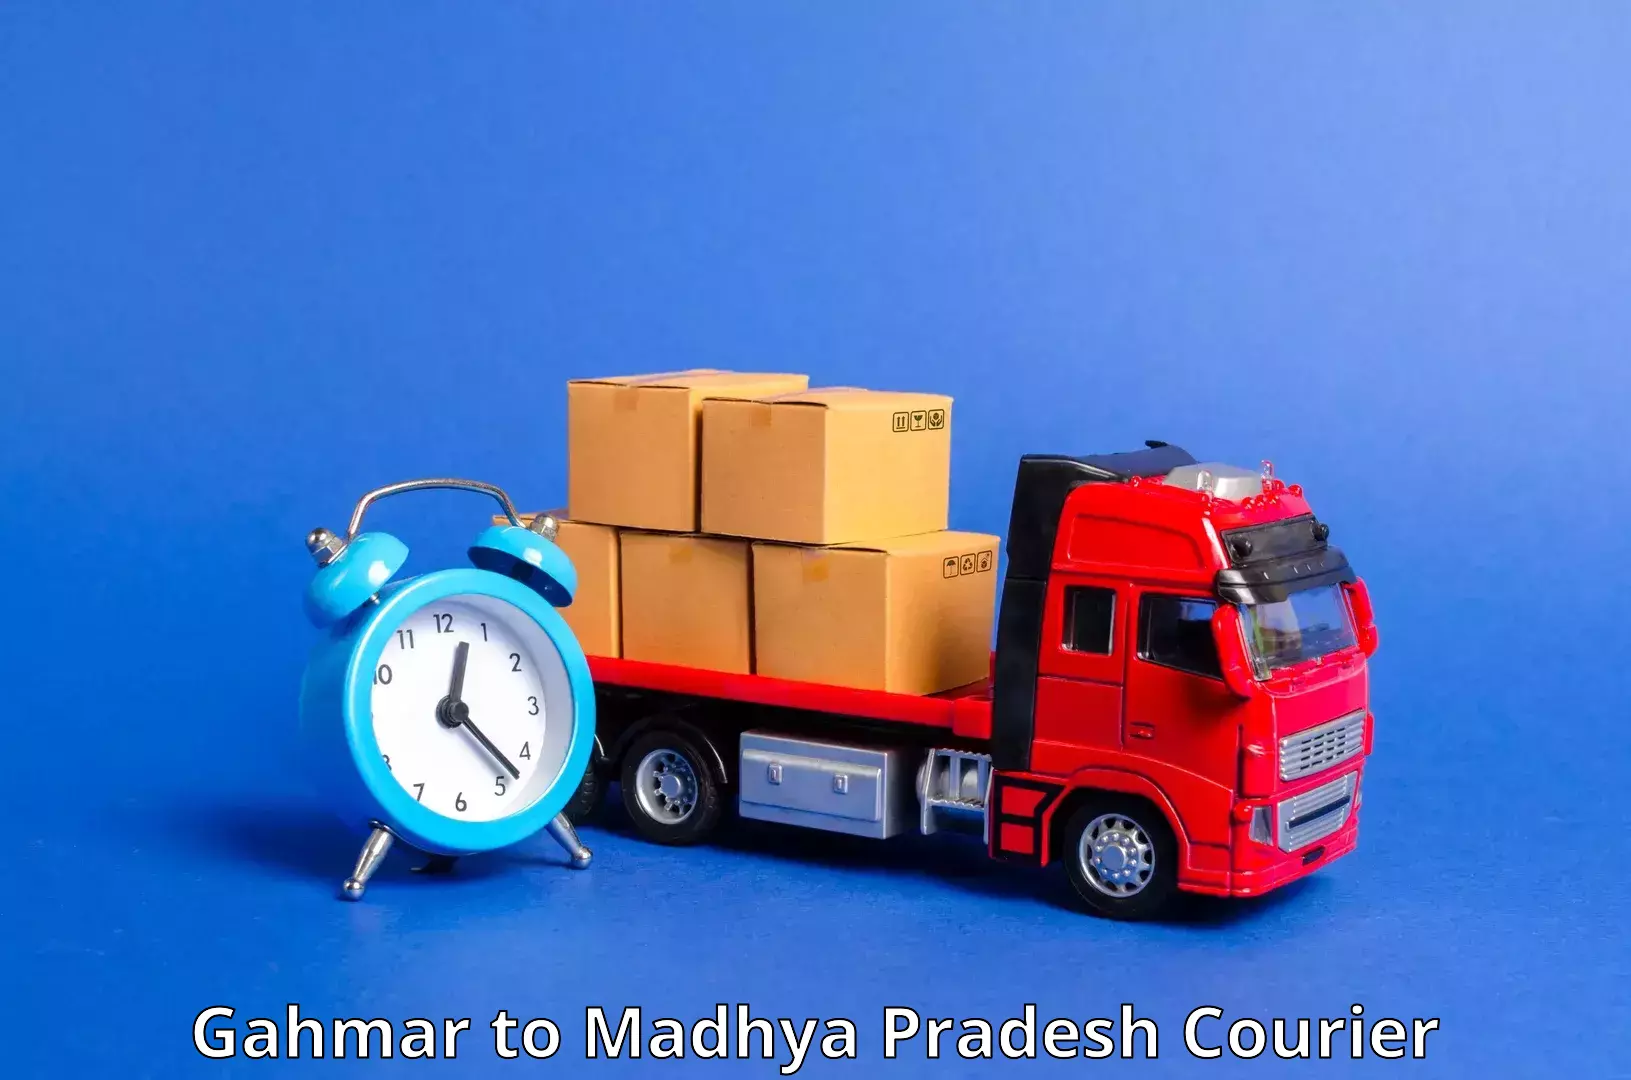 End-to-end delivery Gahmar to Chhindwara